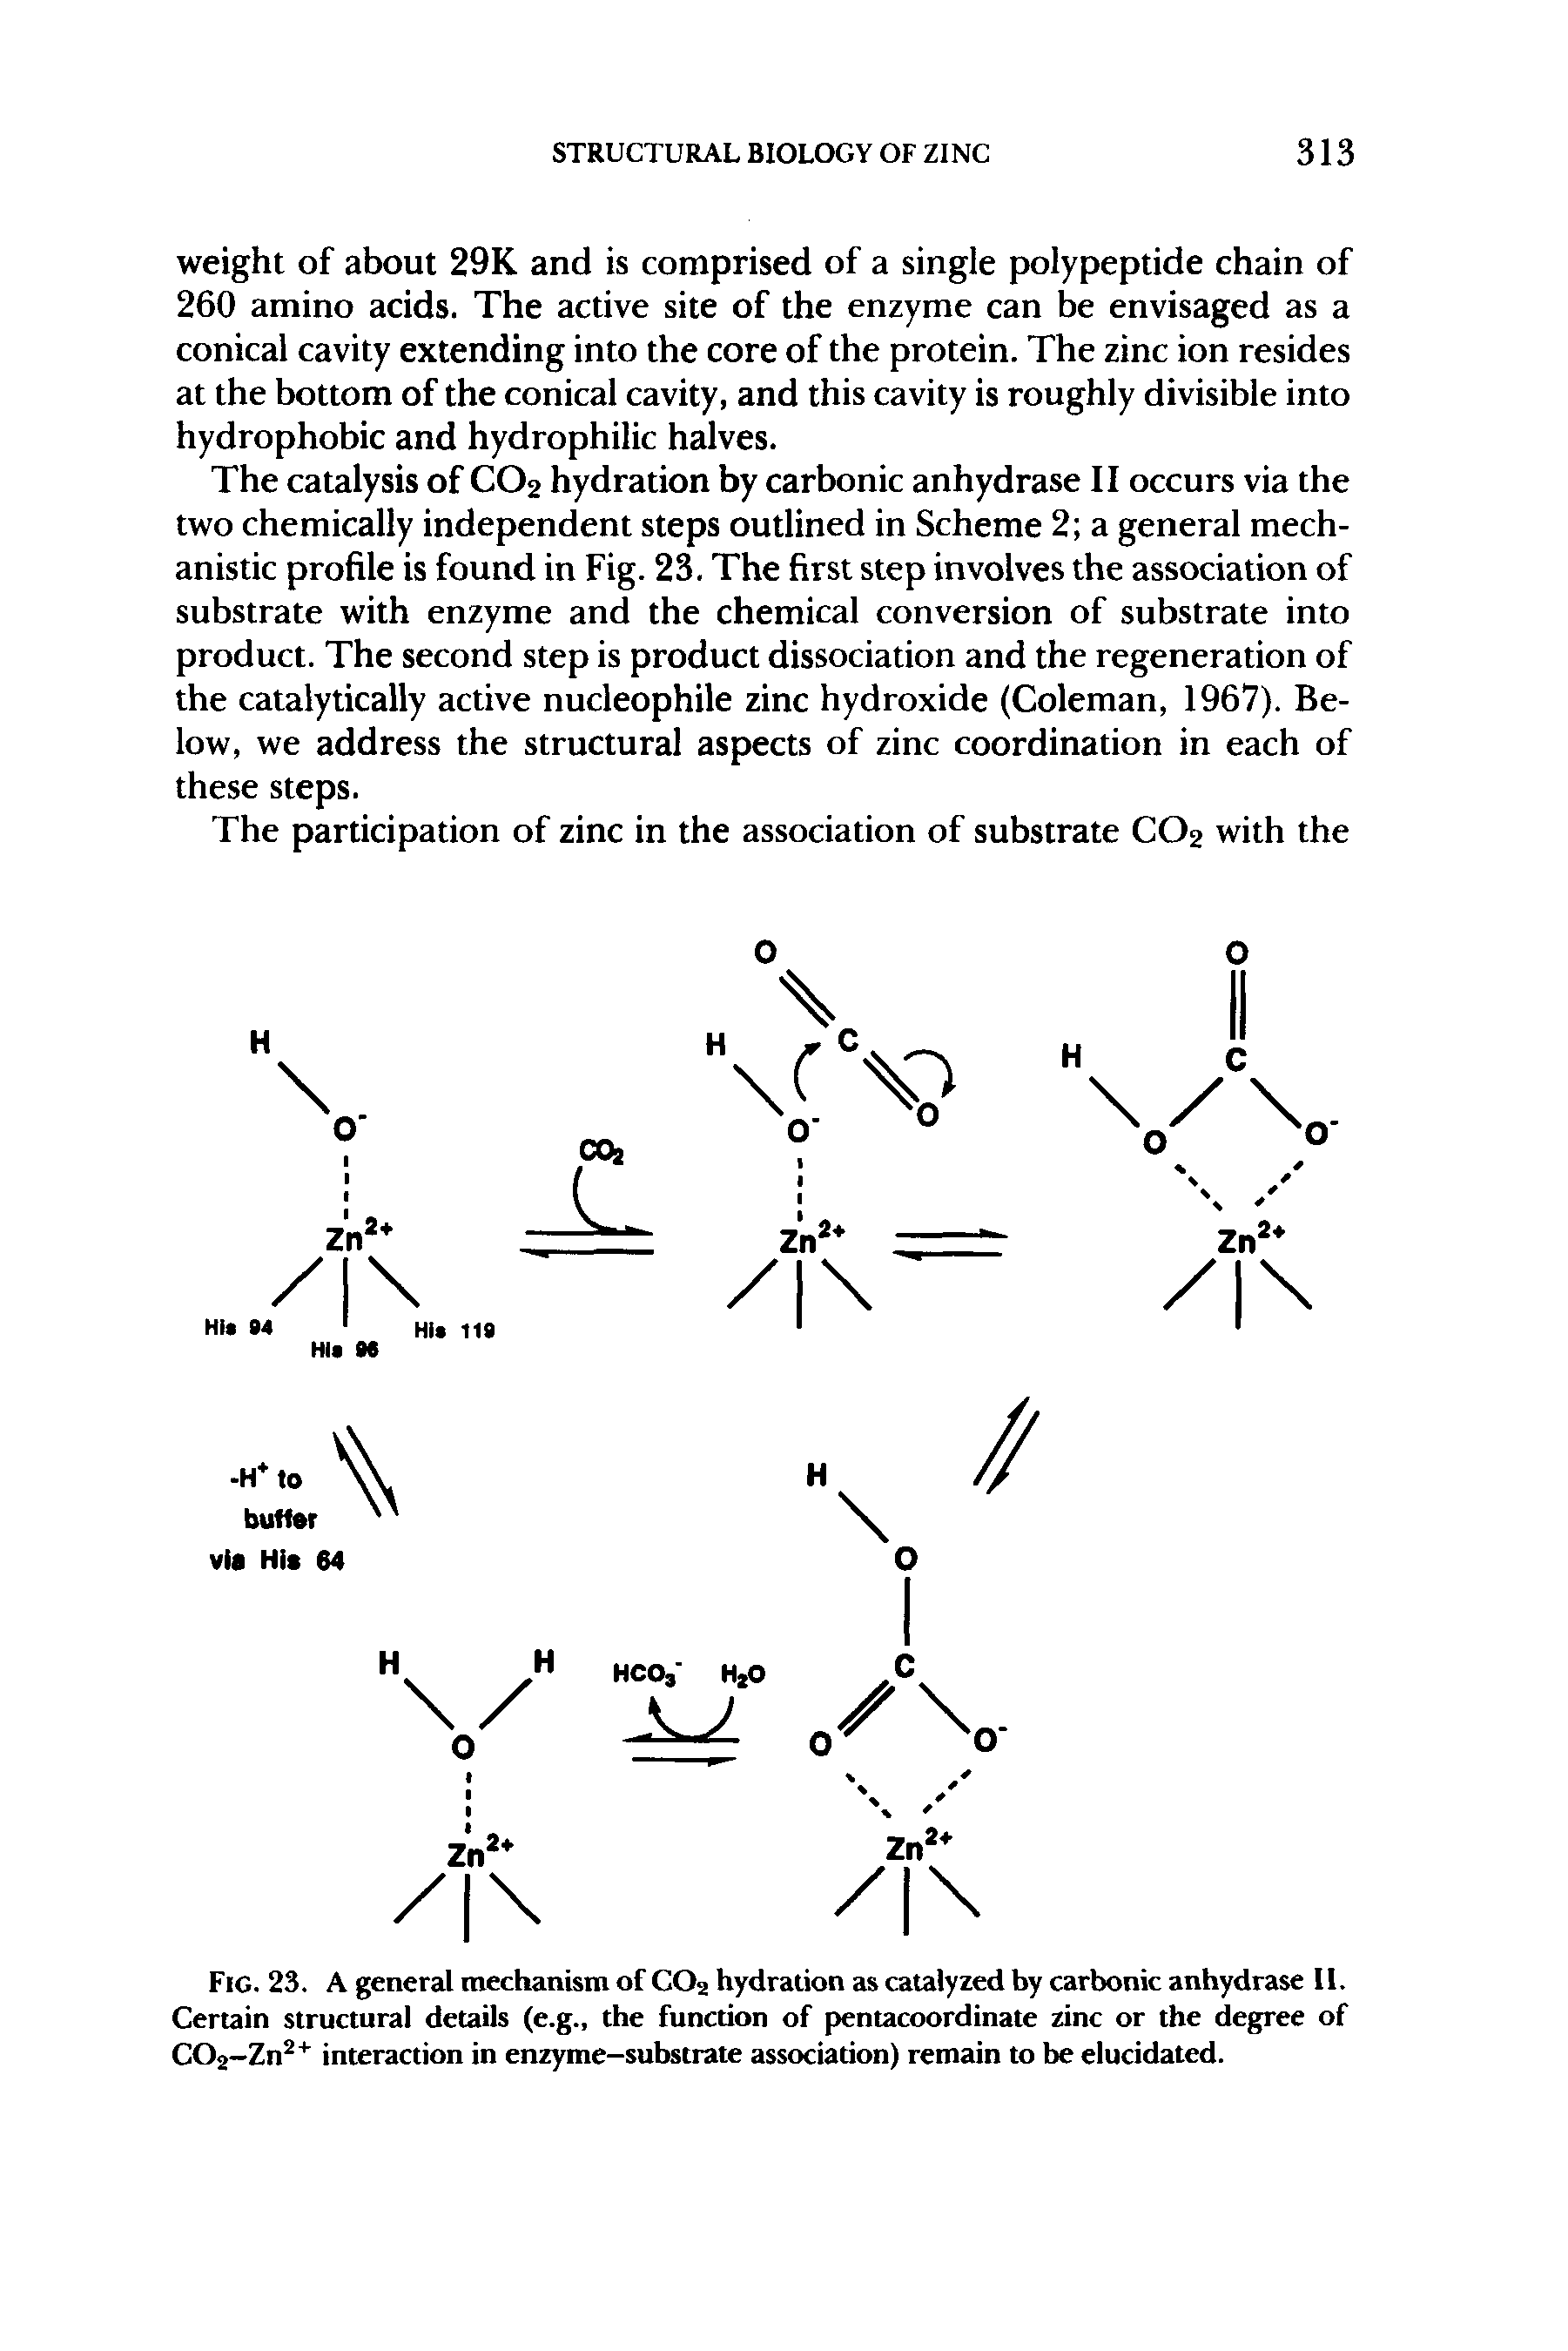 Fig. 23. A general mechanism of CO2 hydration as catalyzed by carbonic anhydrase II. Certain structural details (e.g., the function of pentacoordinate zinc or the degree of CO2—Zn interaction in enzyme-substrate association) remain to be elucidated.